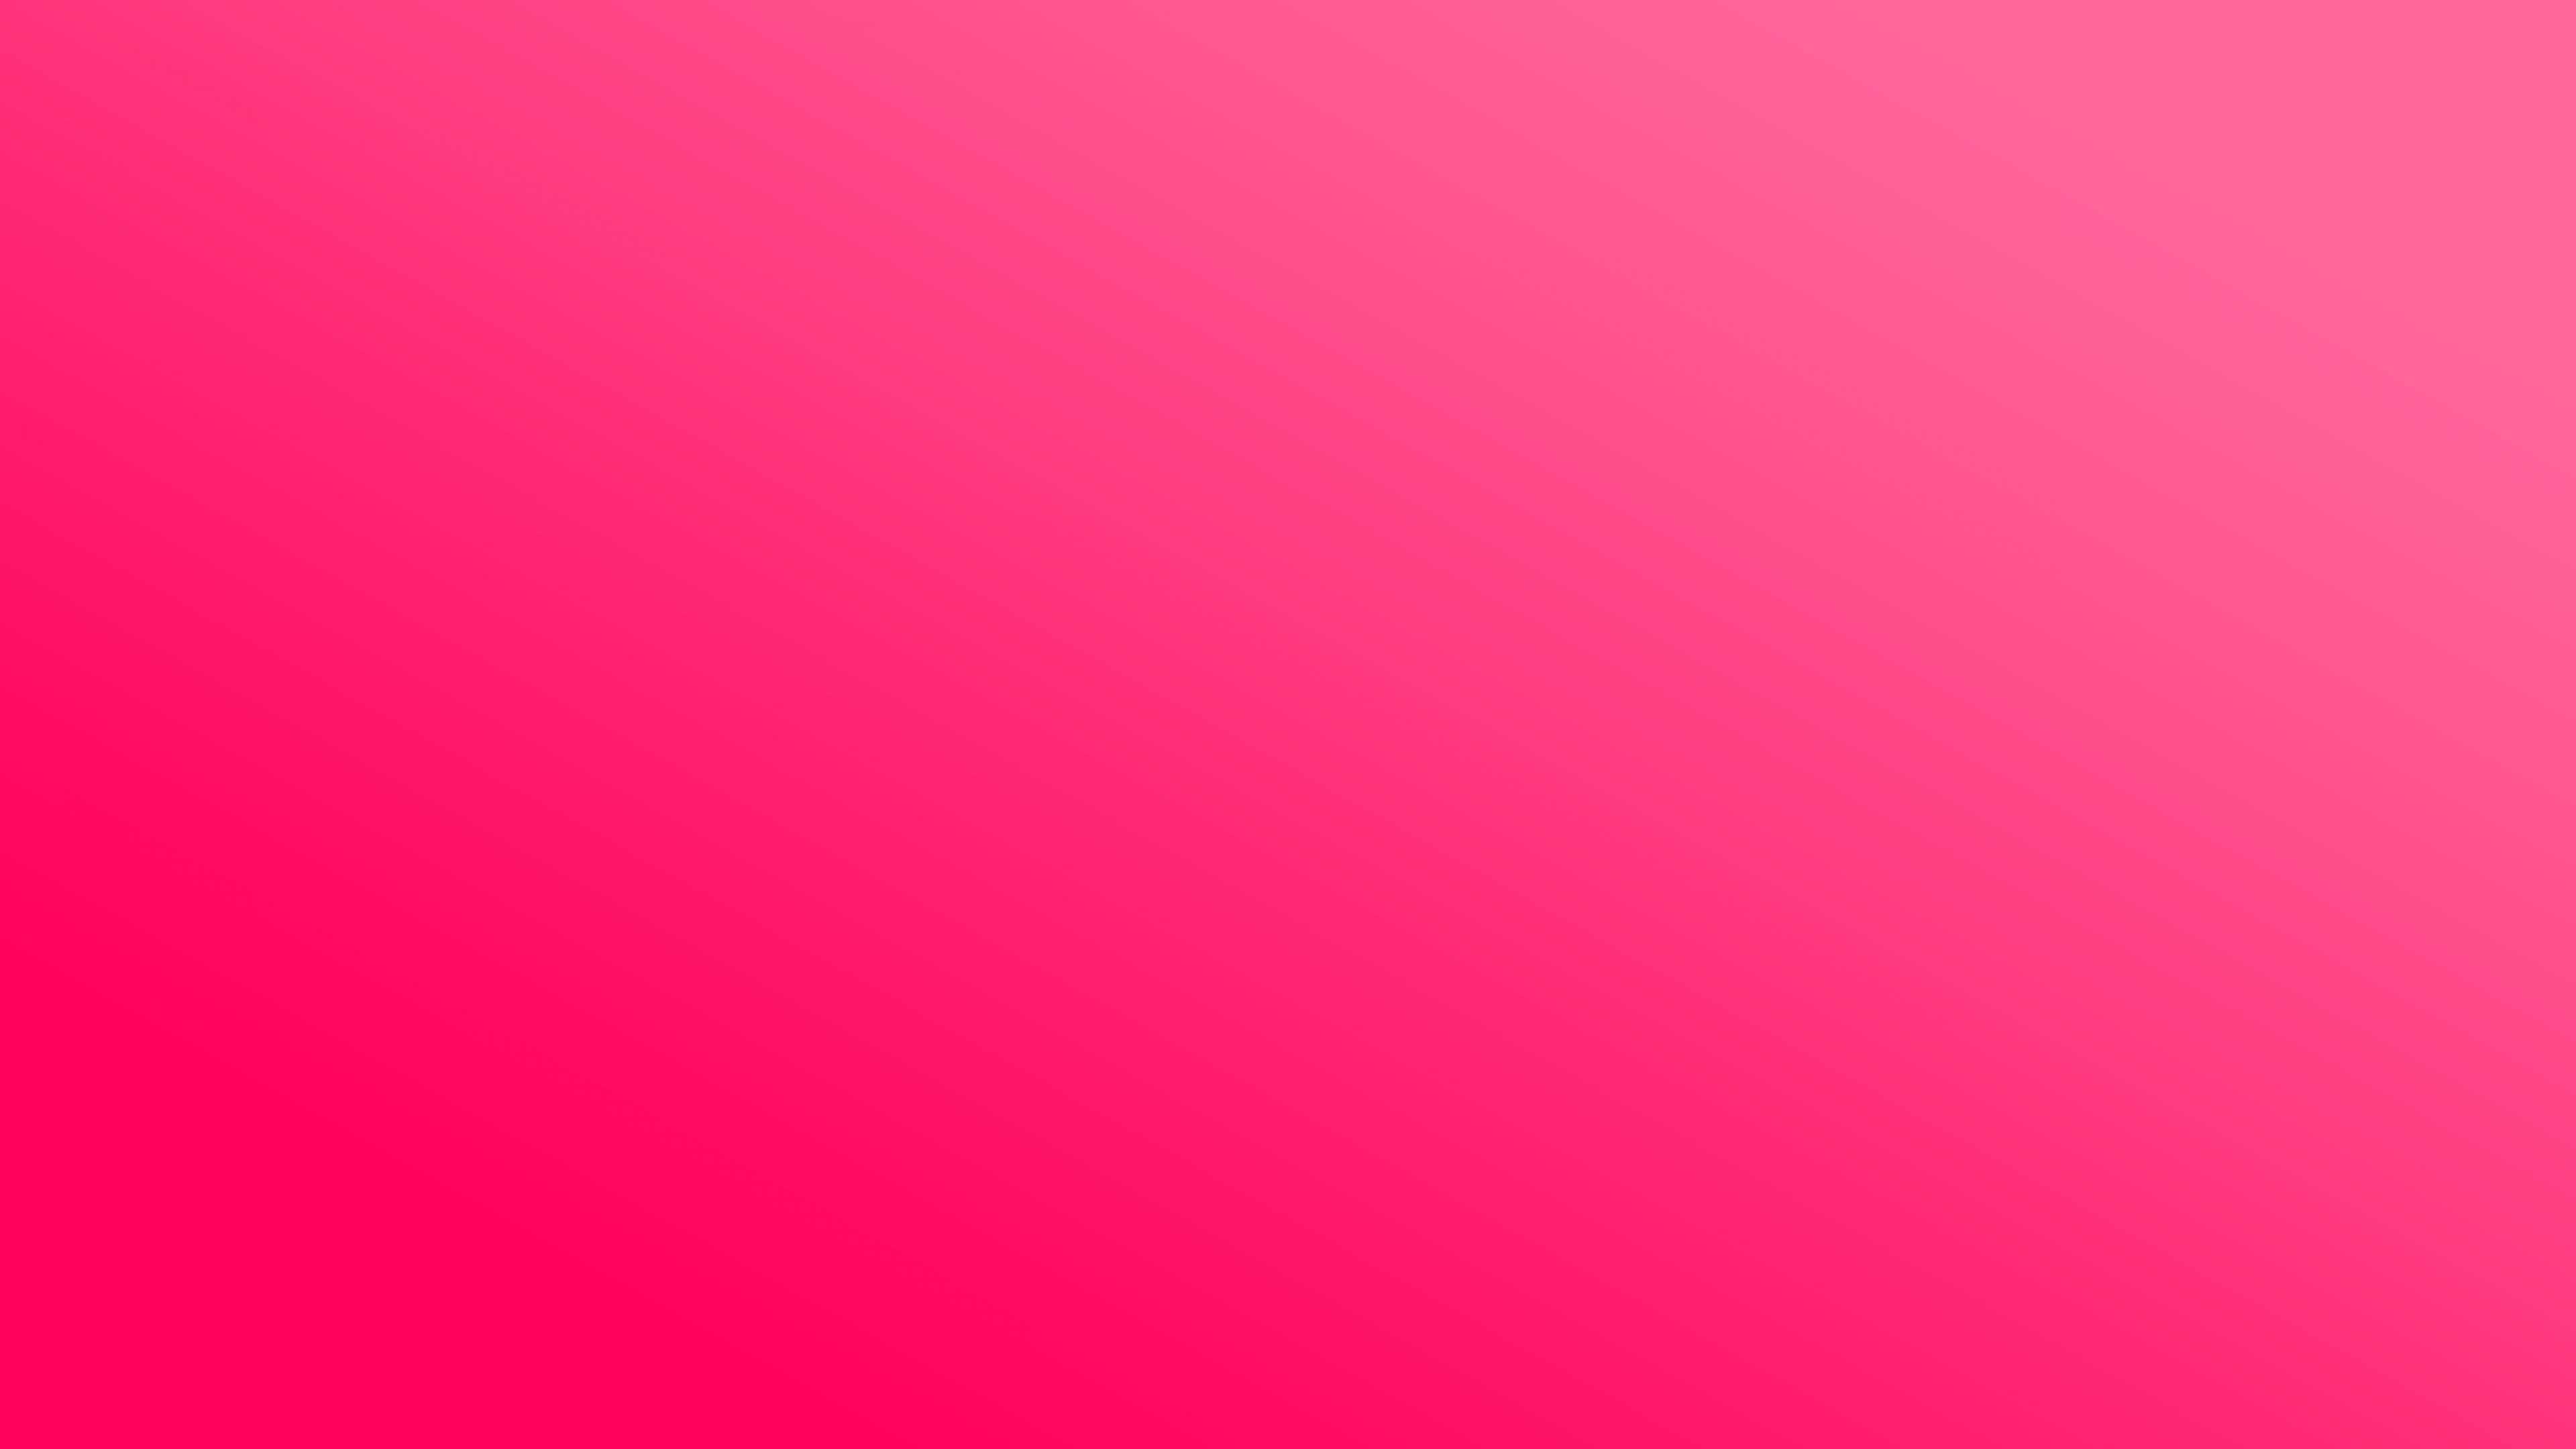 3840x2160 4K Ultra HD Pink Wallpapers HD, Desktop Backgrounds , Images and  Pictures